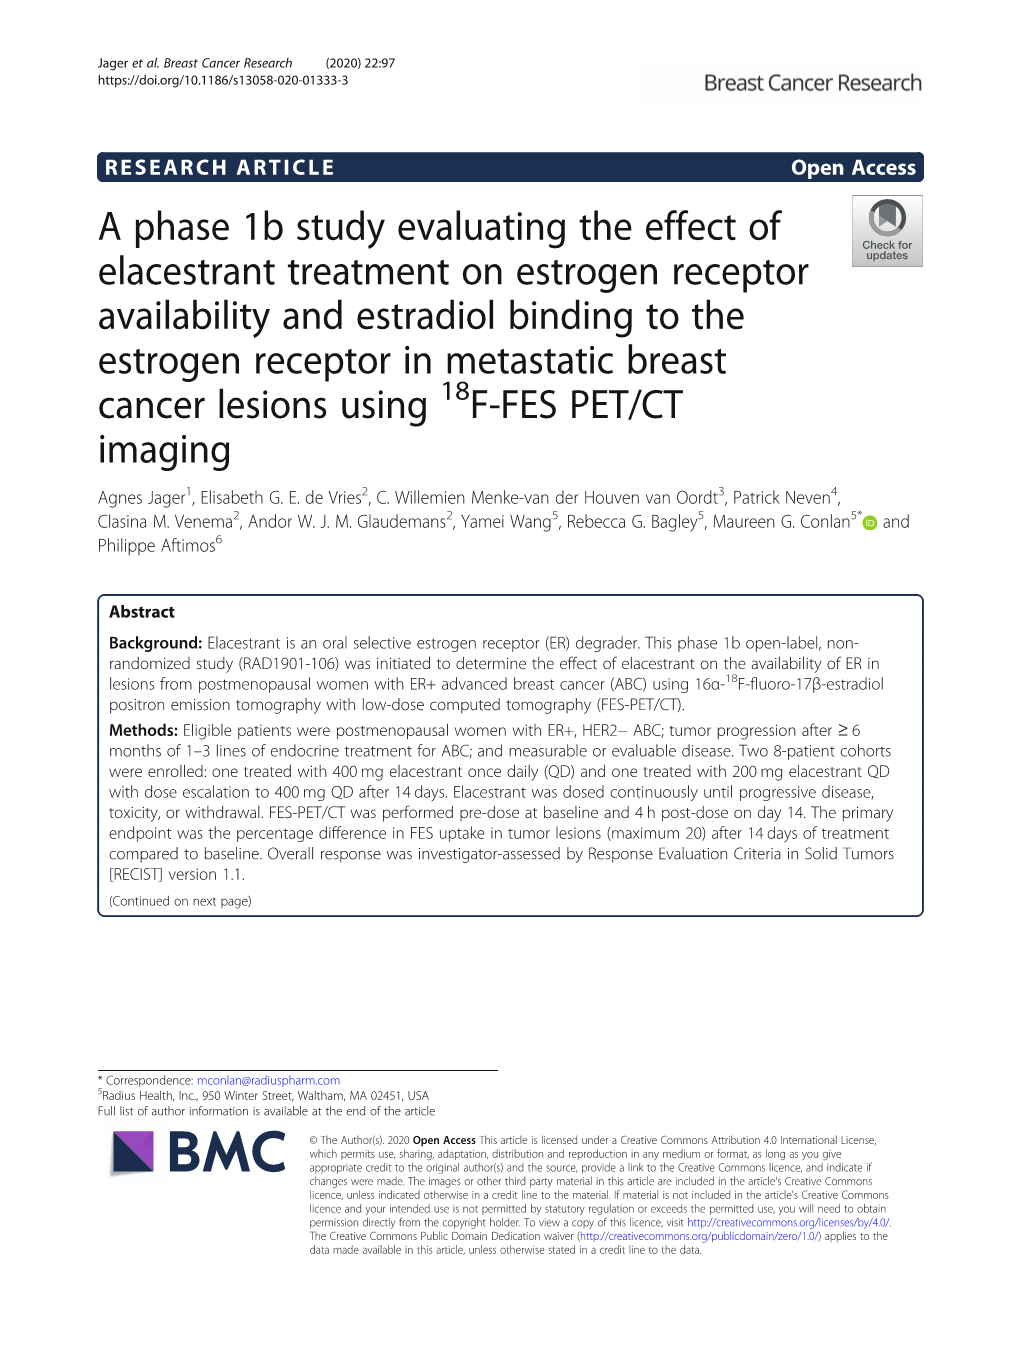 A Phase 1B Study Evaluating the Effect of Elacestrant Treatment on Estrogen